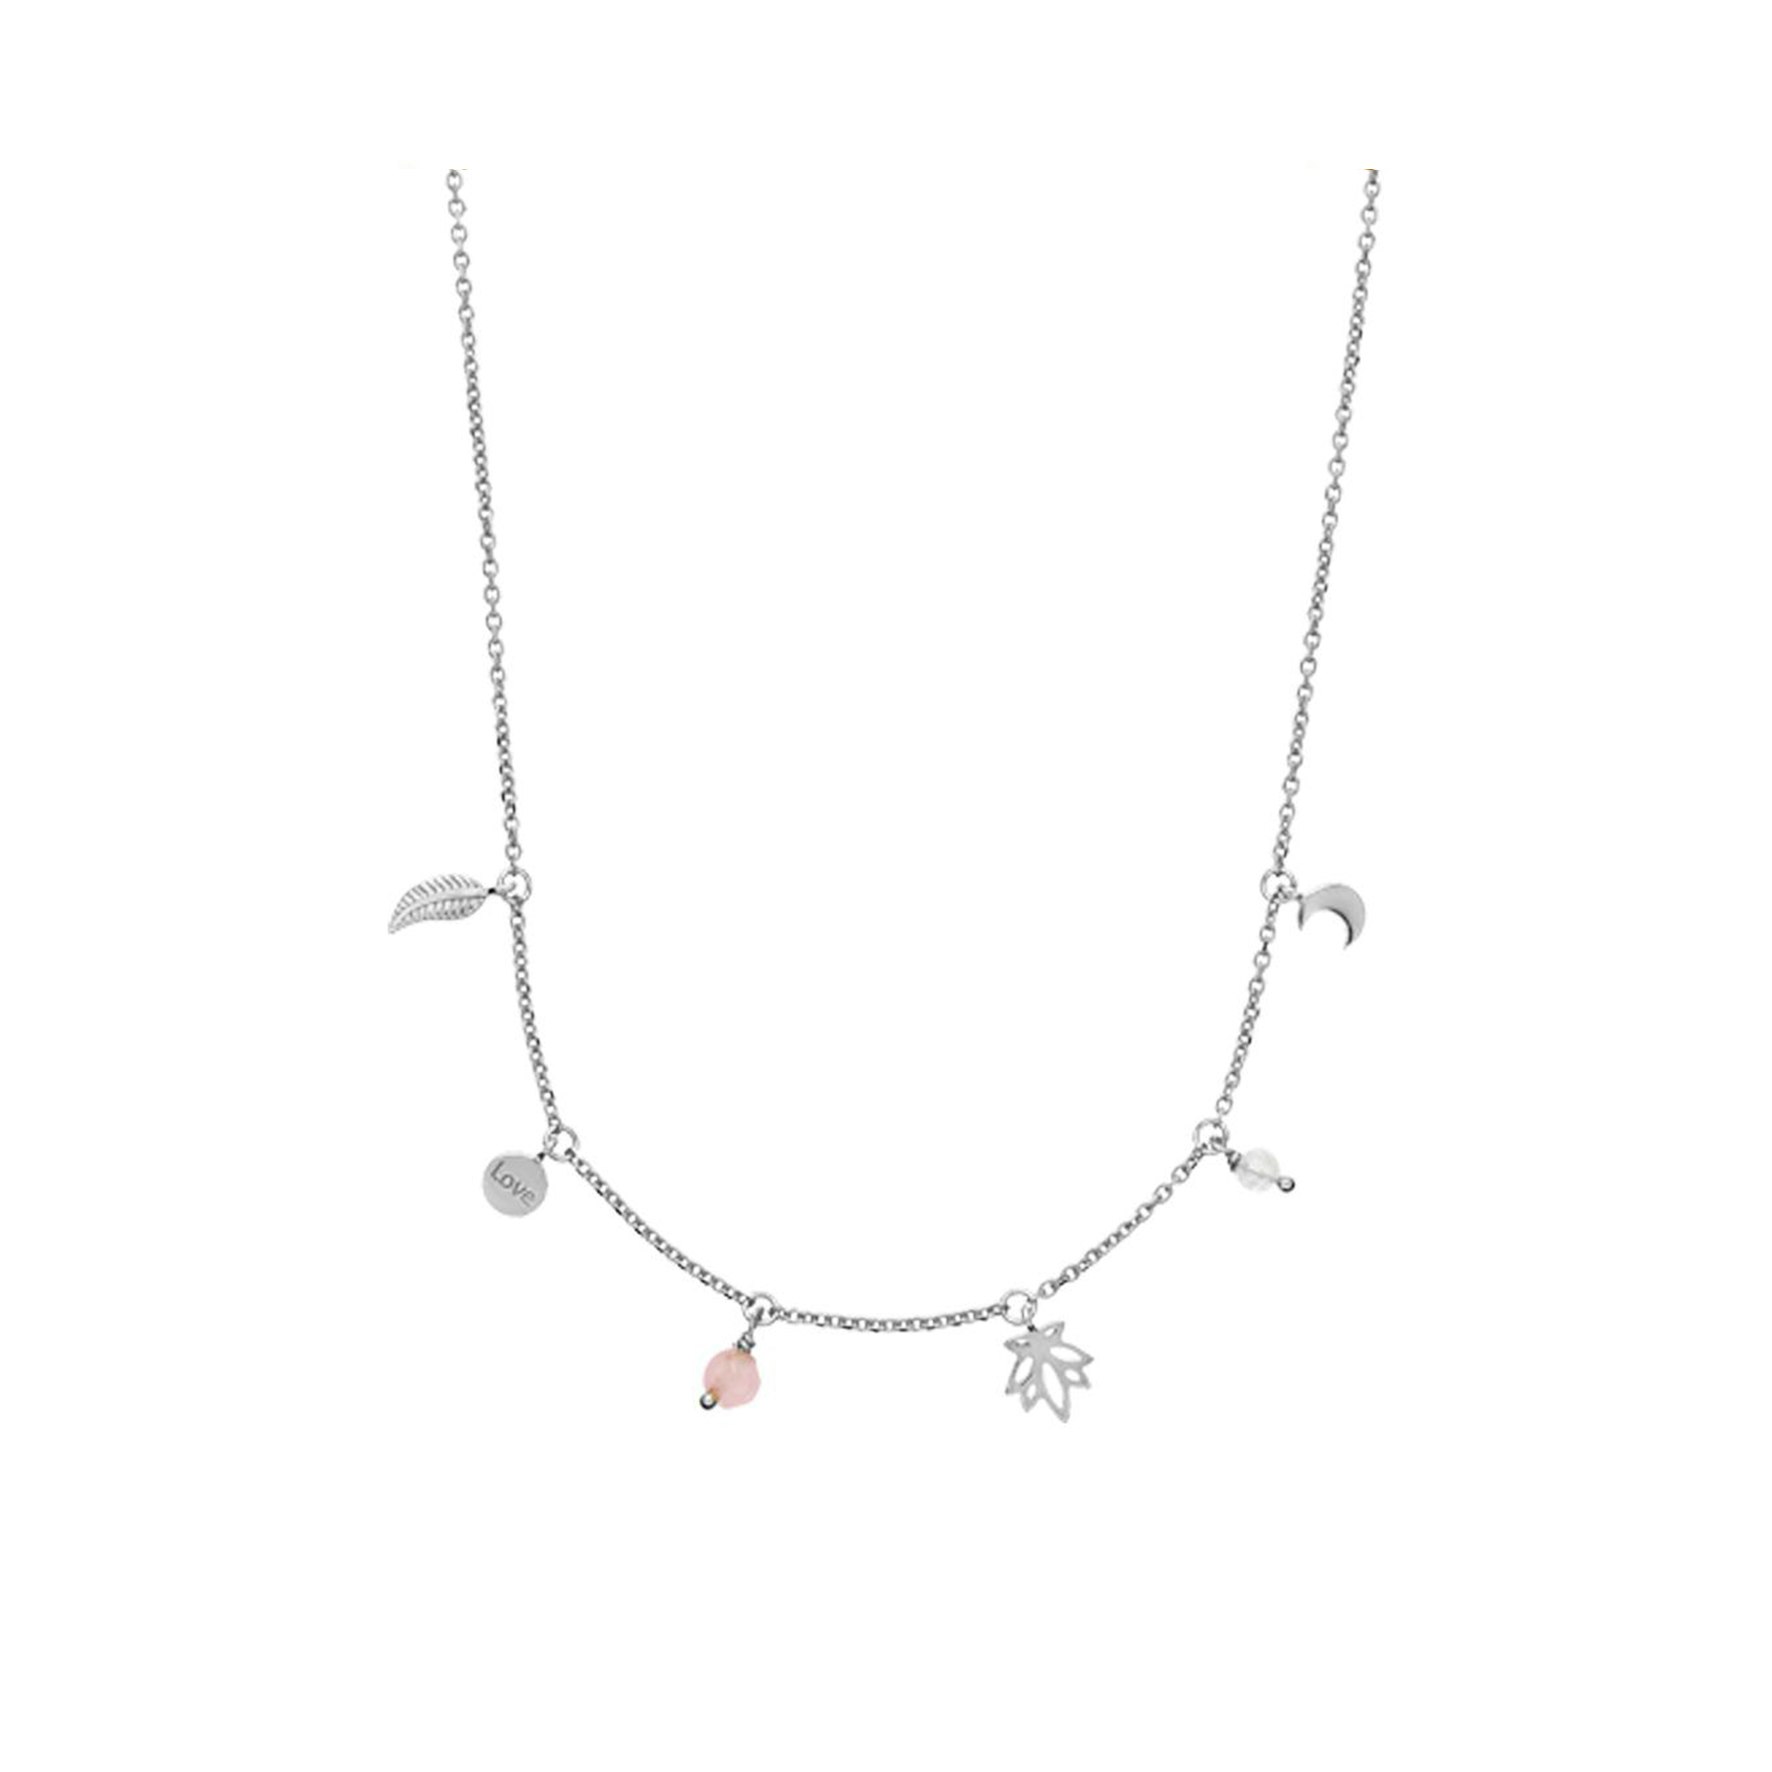 Mie Moltke Necklace from Izabel Camille in Silver Sterling 925